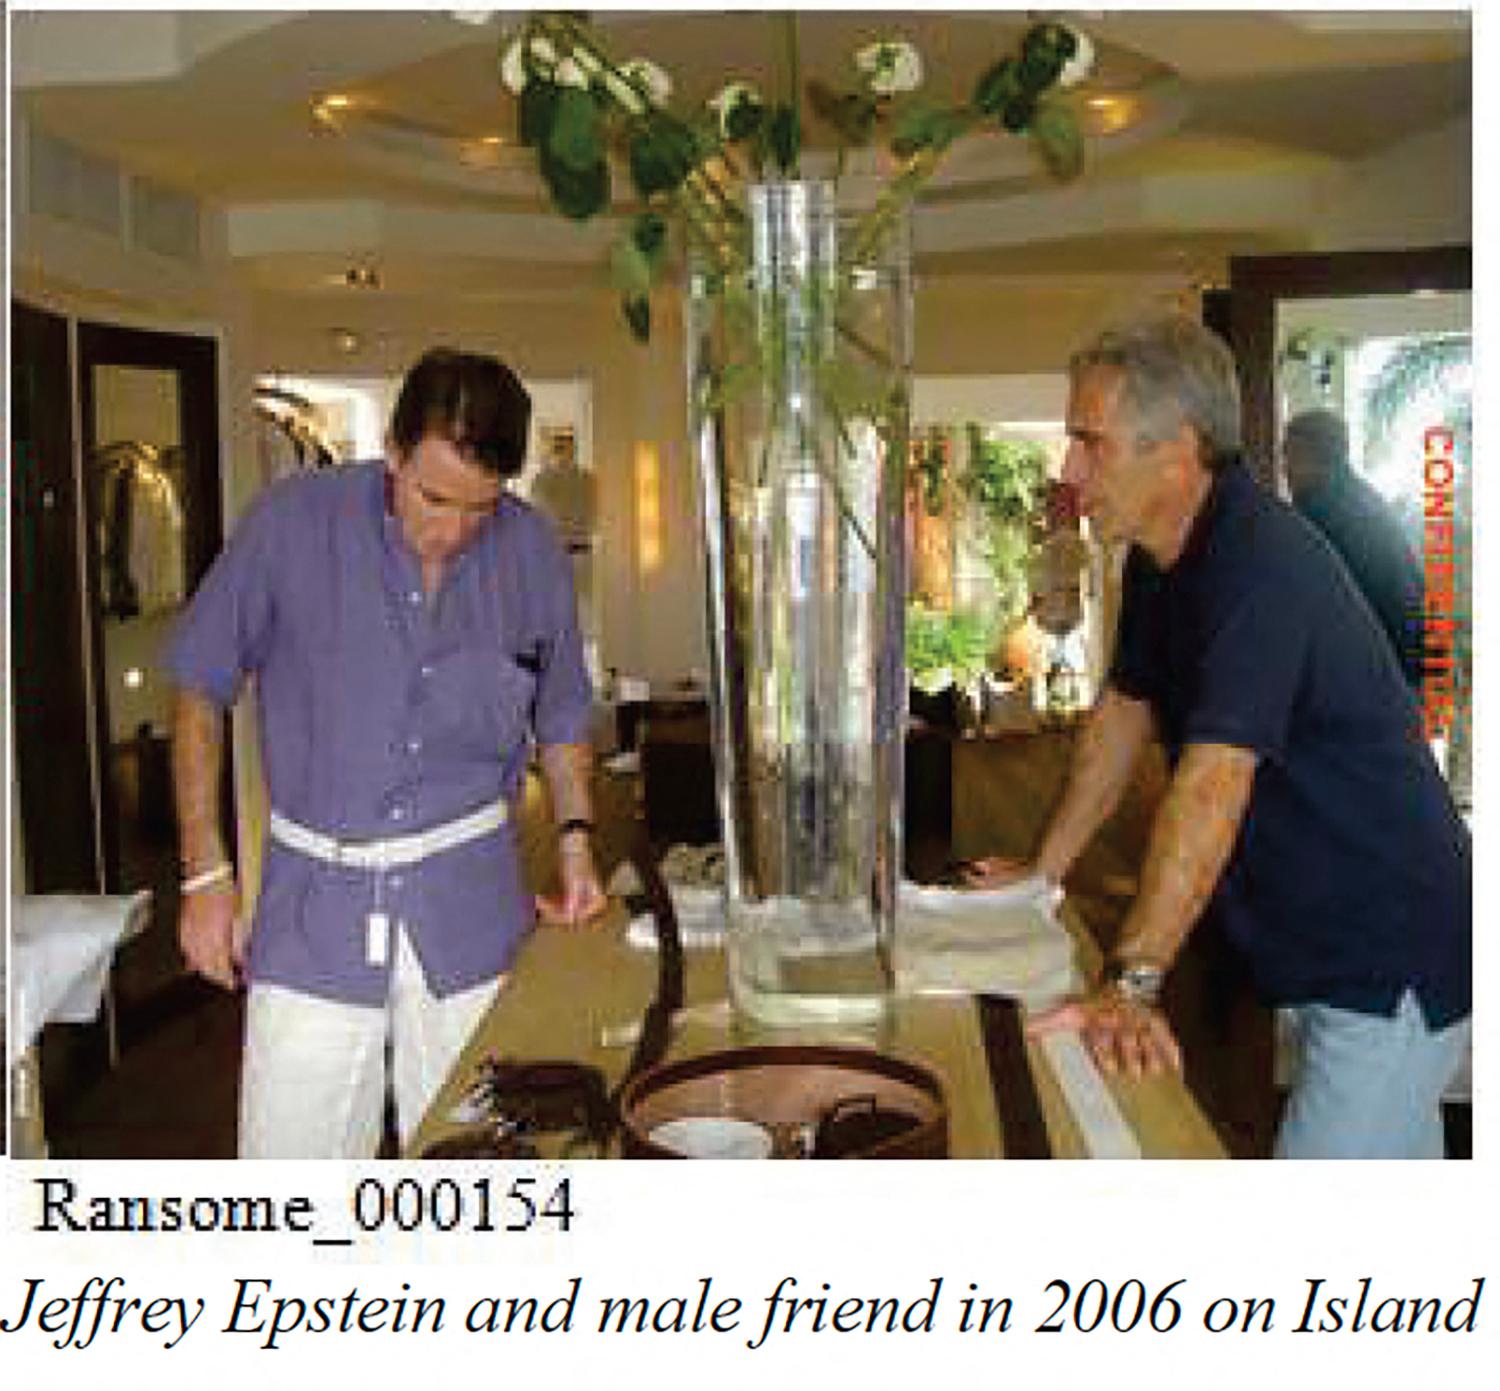 Jeffrey Epstein and friend on the island in 2006